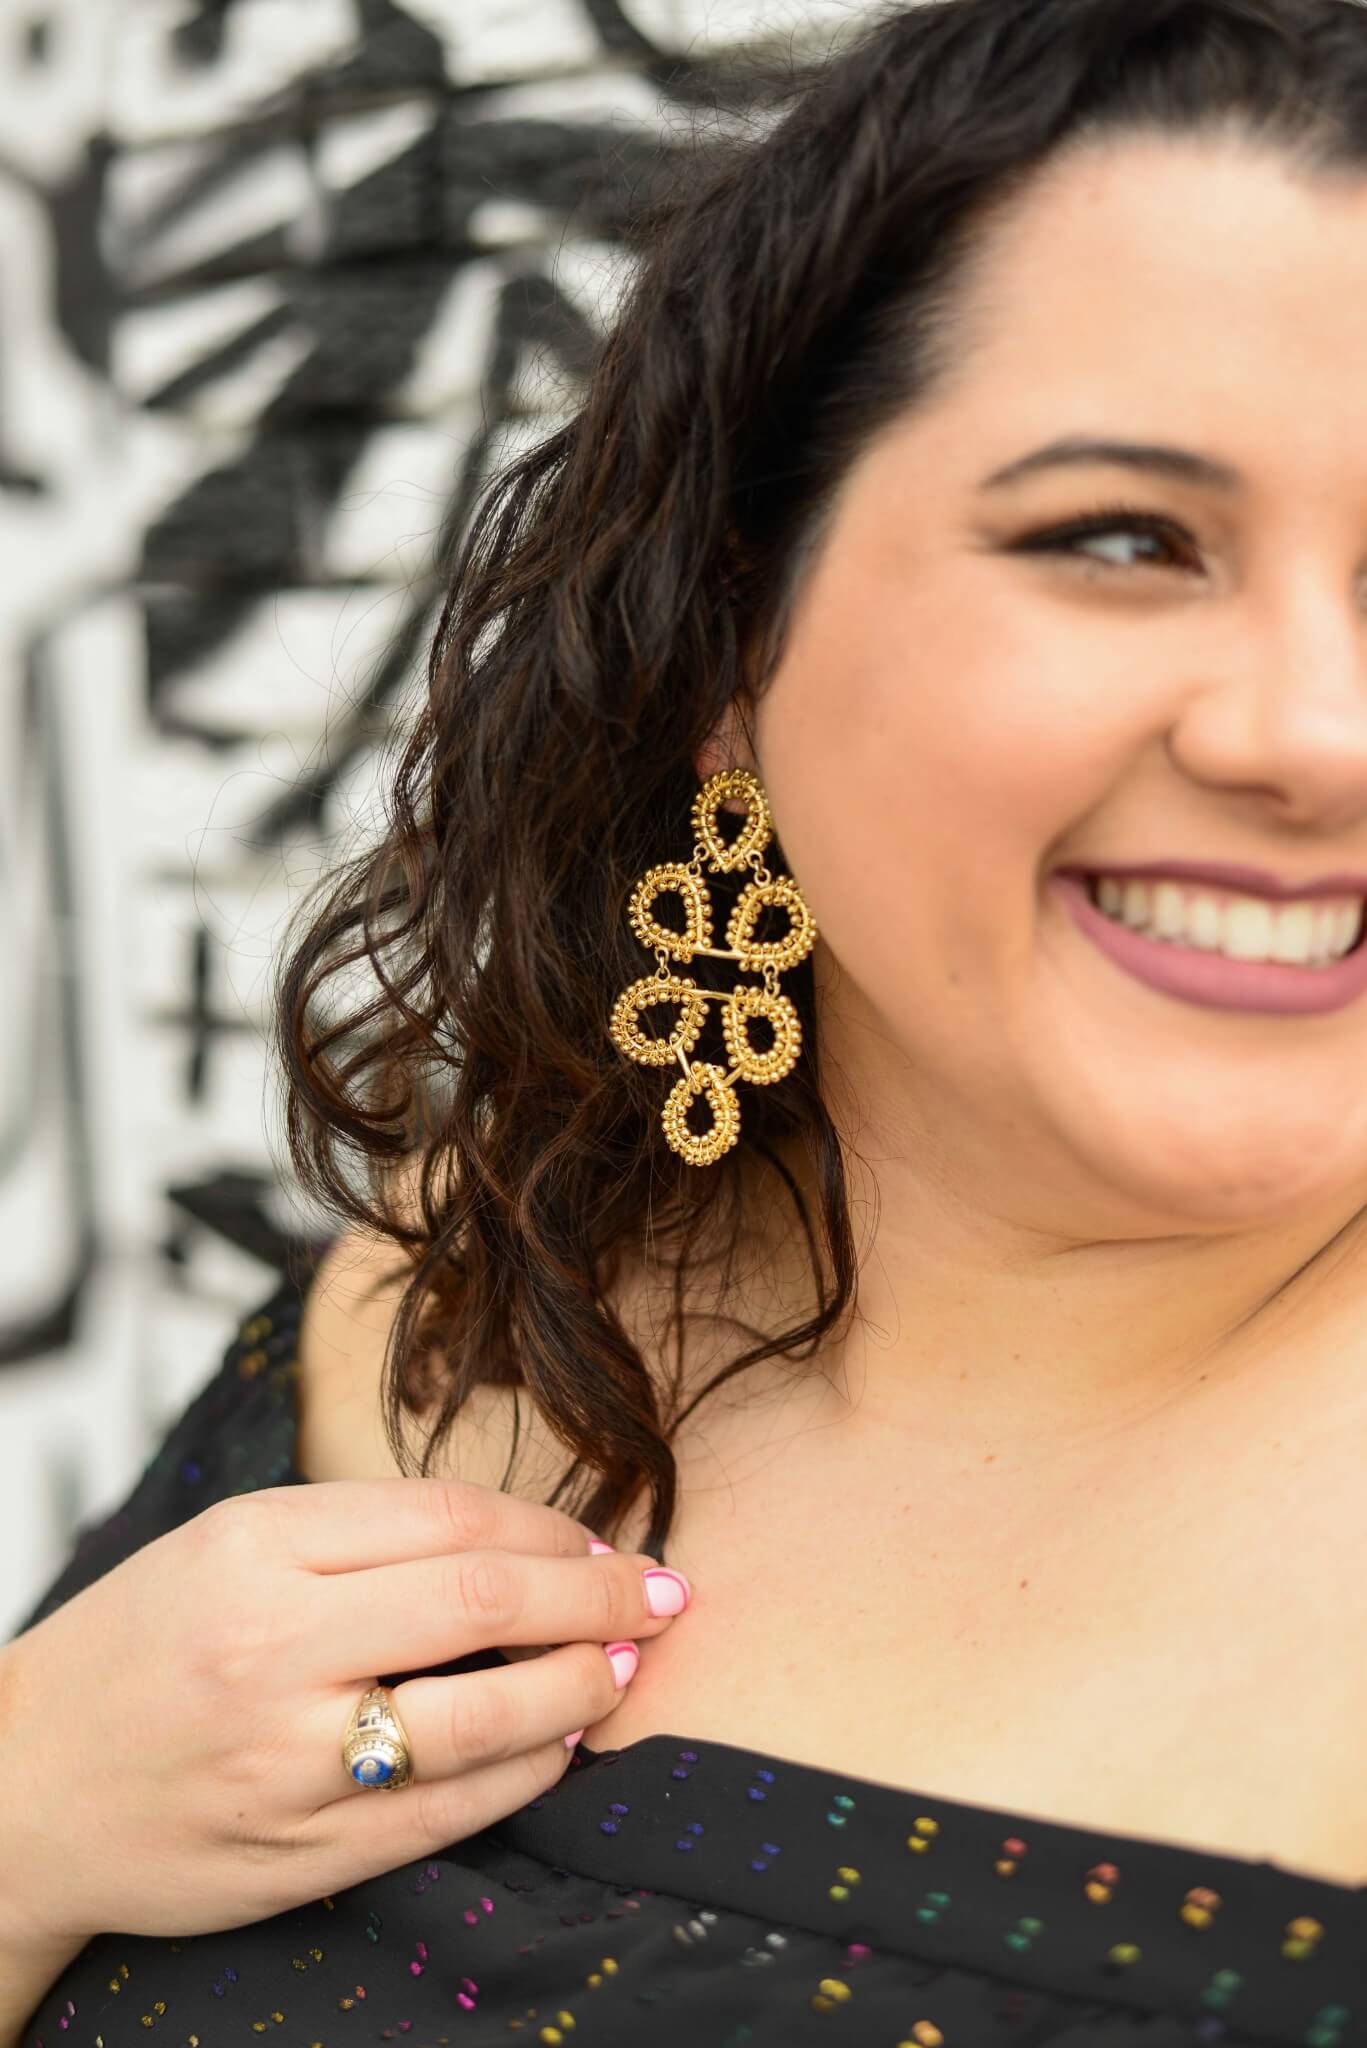 Gold statement earrings are always a good idea